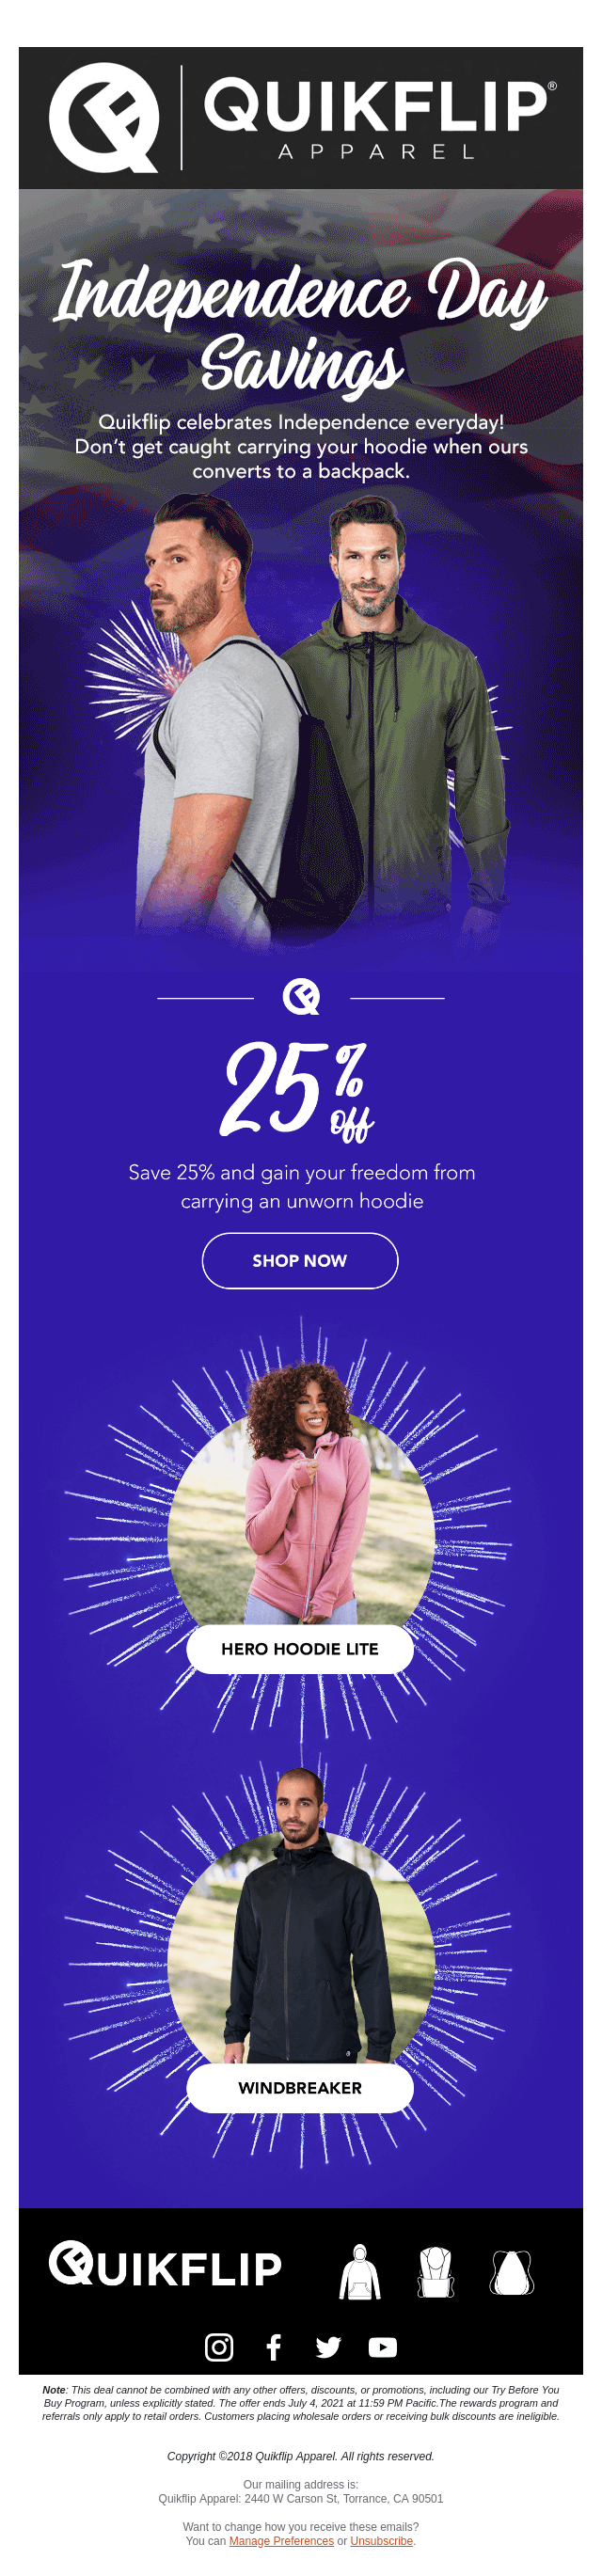 Image shows an email message promoting a July 4th sale